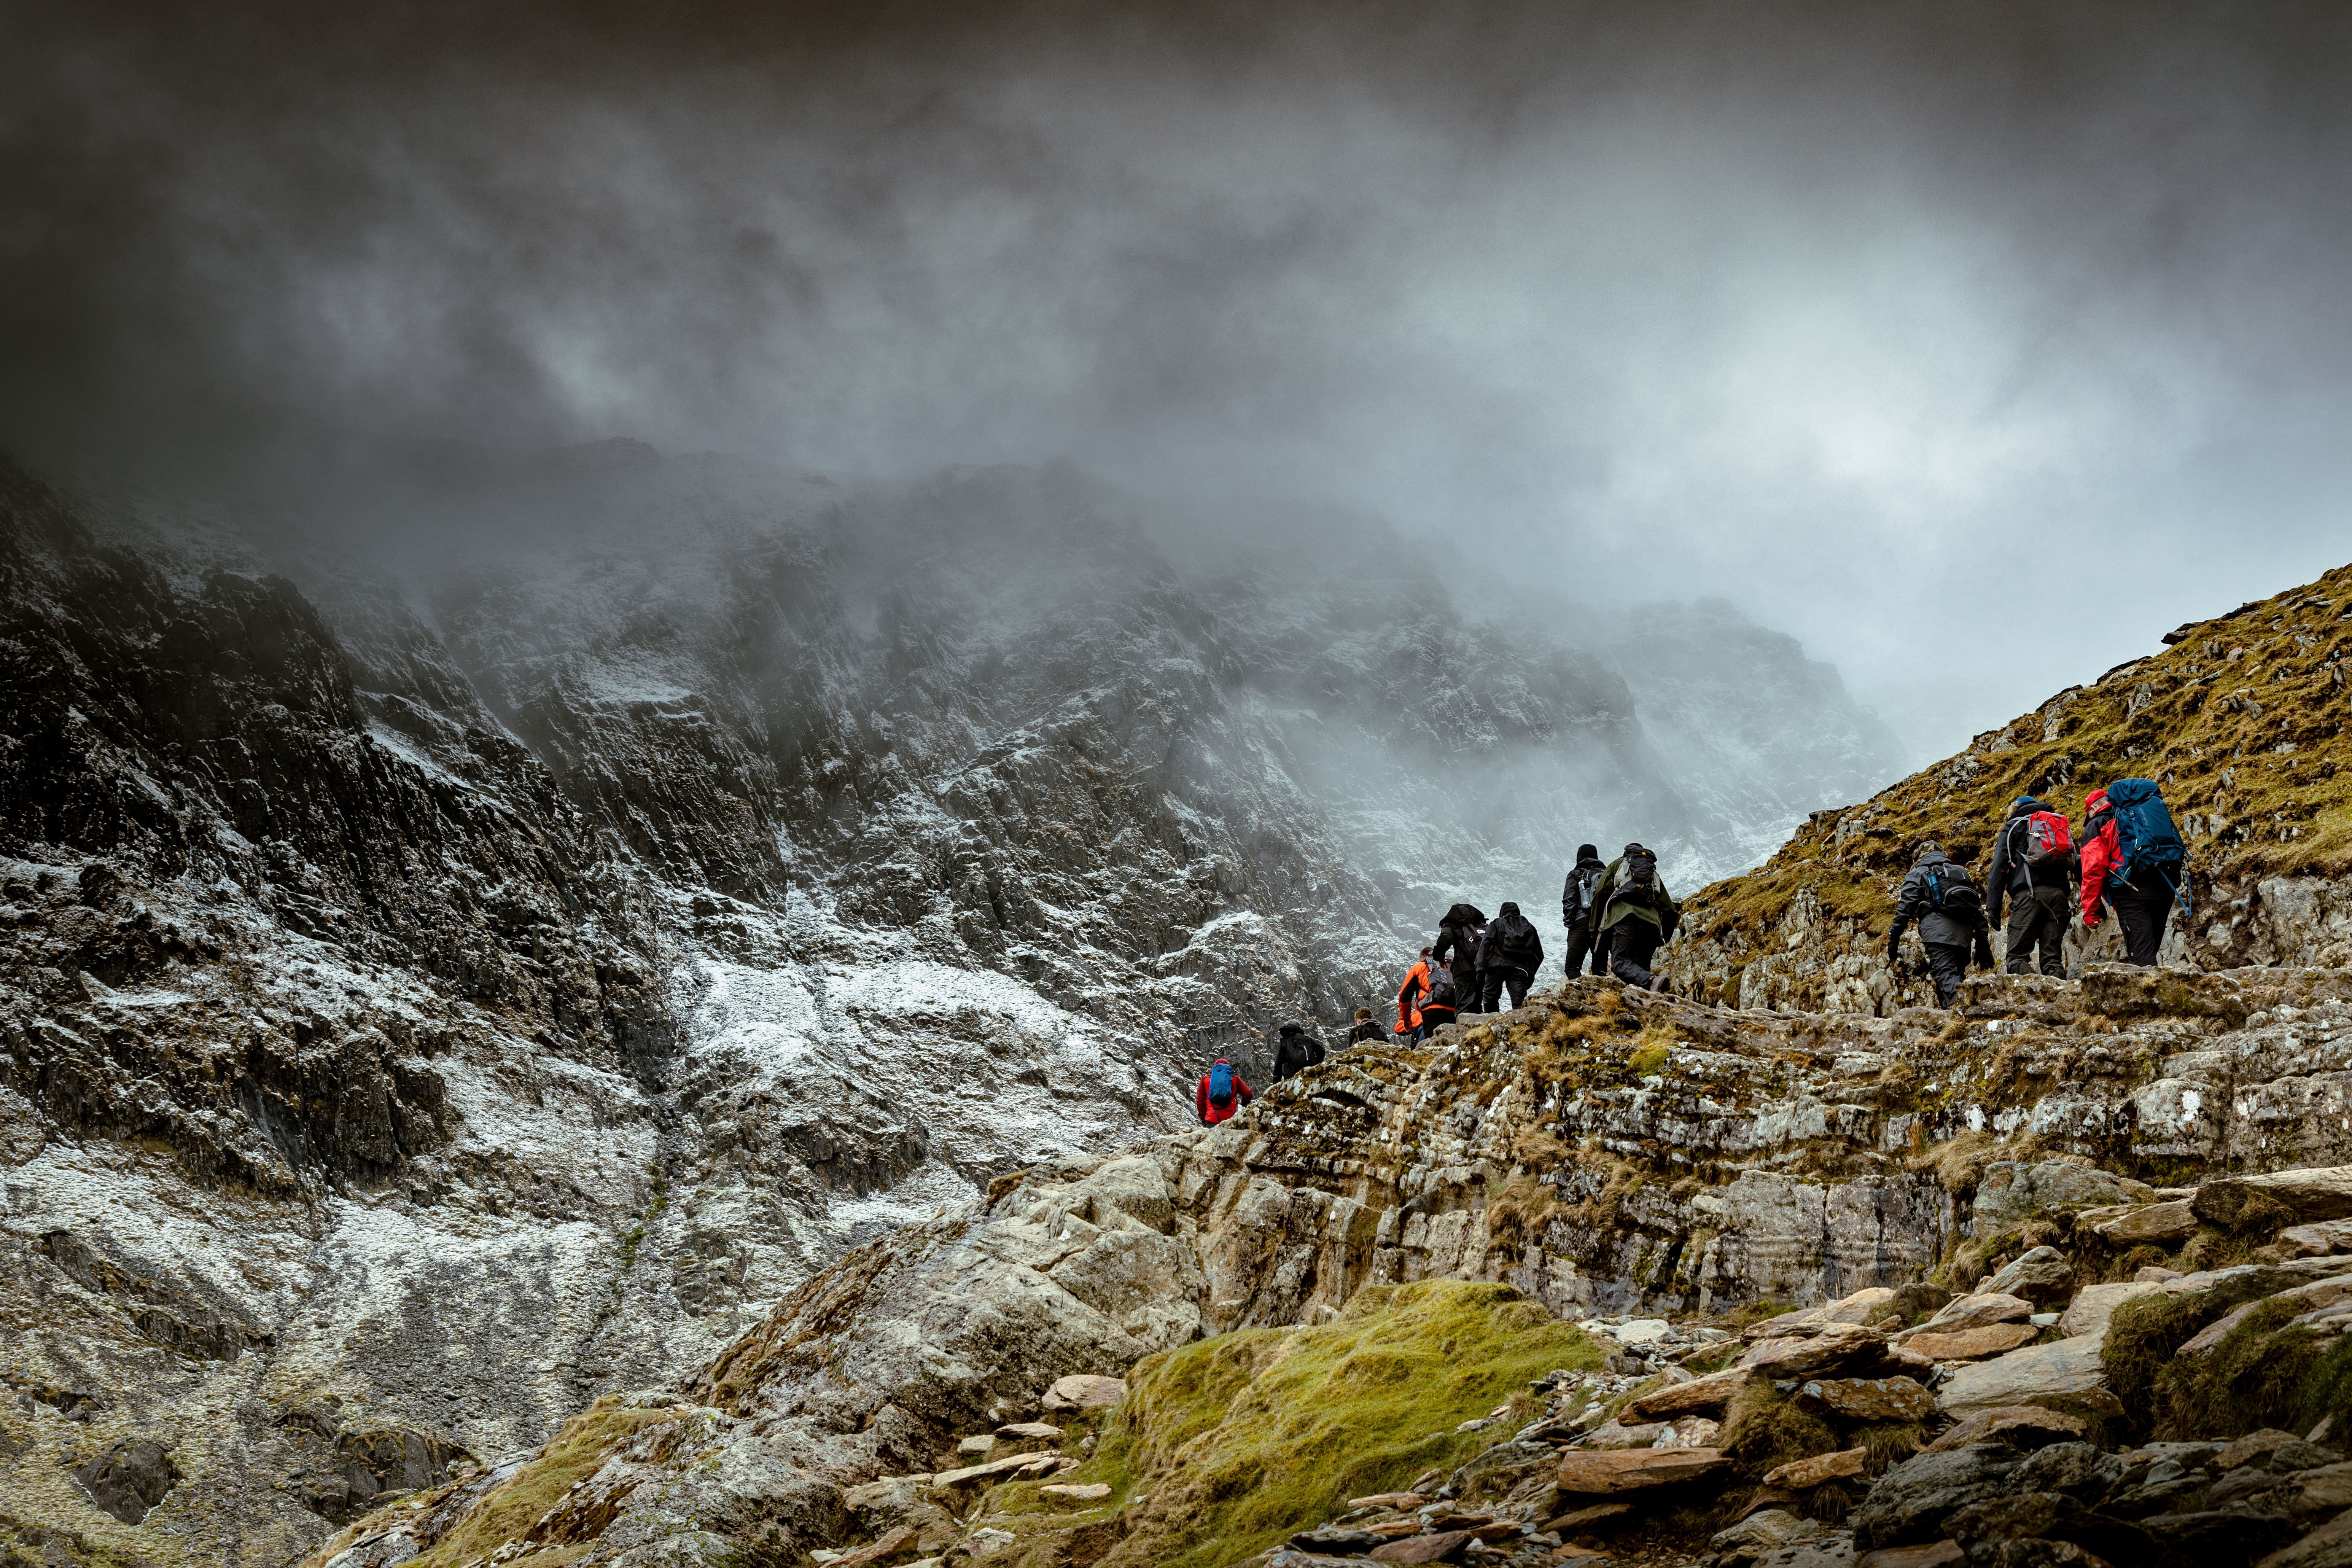 Hikers walking up one of the main routes to Snowdon, Wales’s highest peak